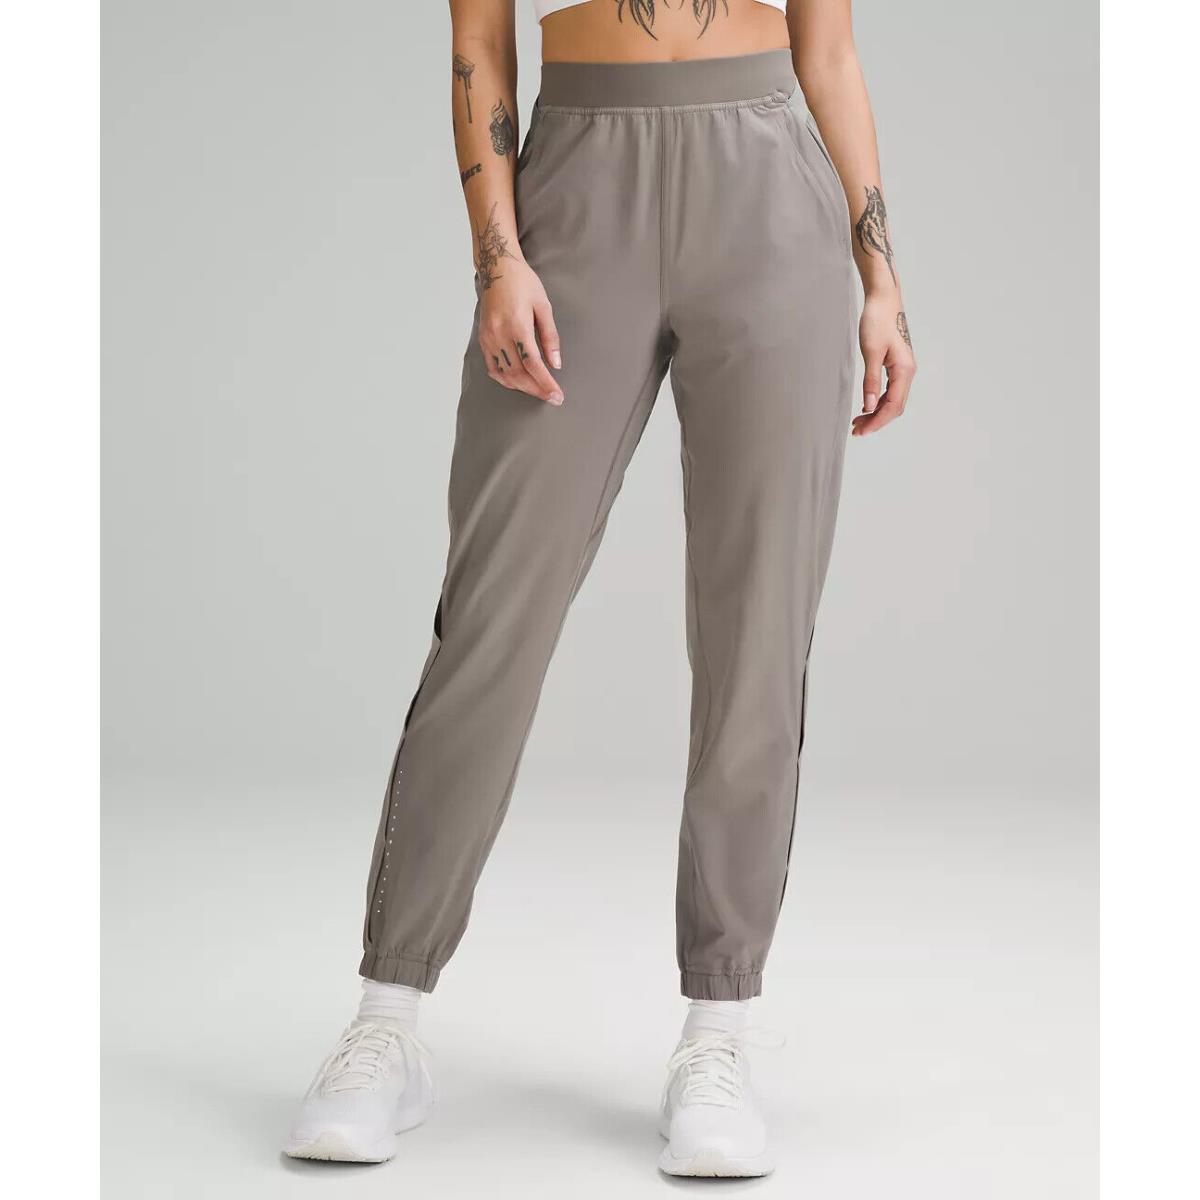 Lululemon Adapted State High Rise Jogger Airflow - Retail 14